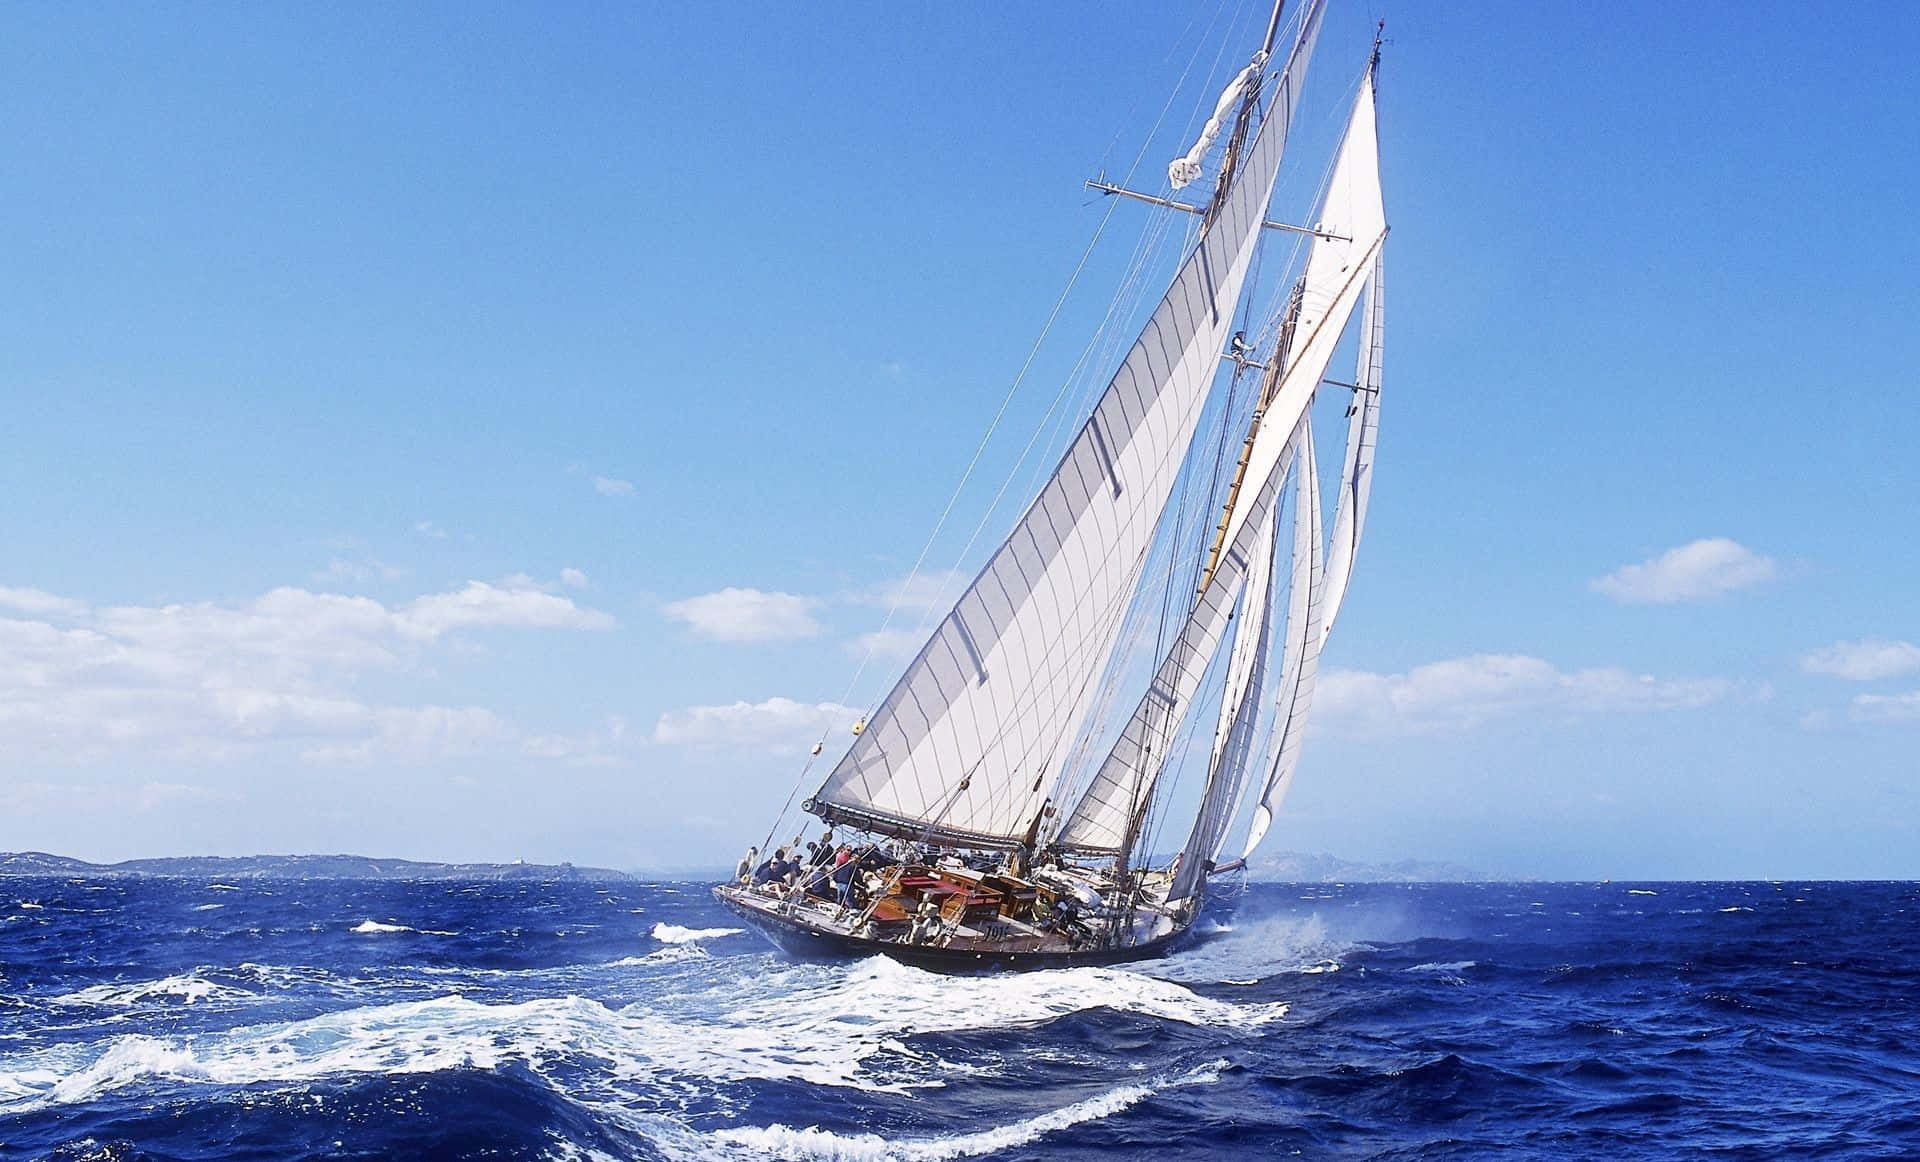 Image  A majestic sailboat gliding across the open ocean